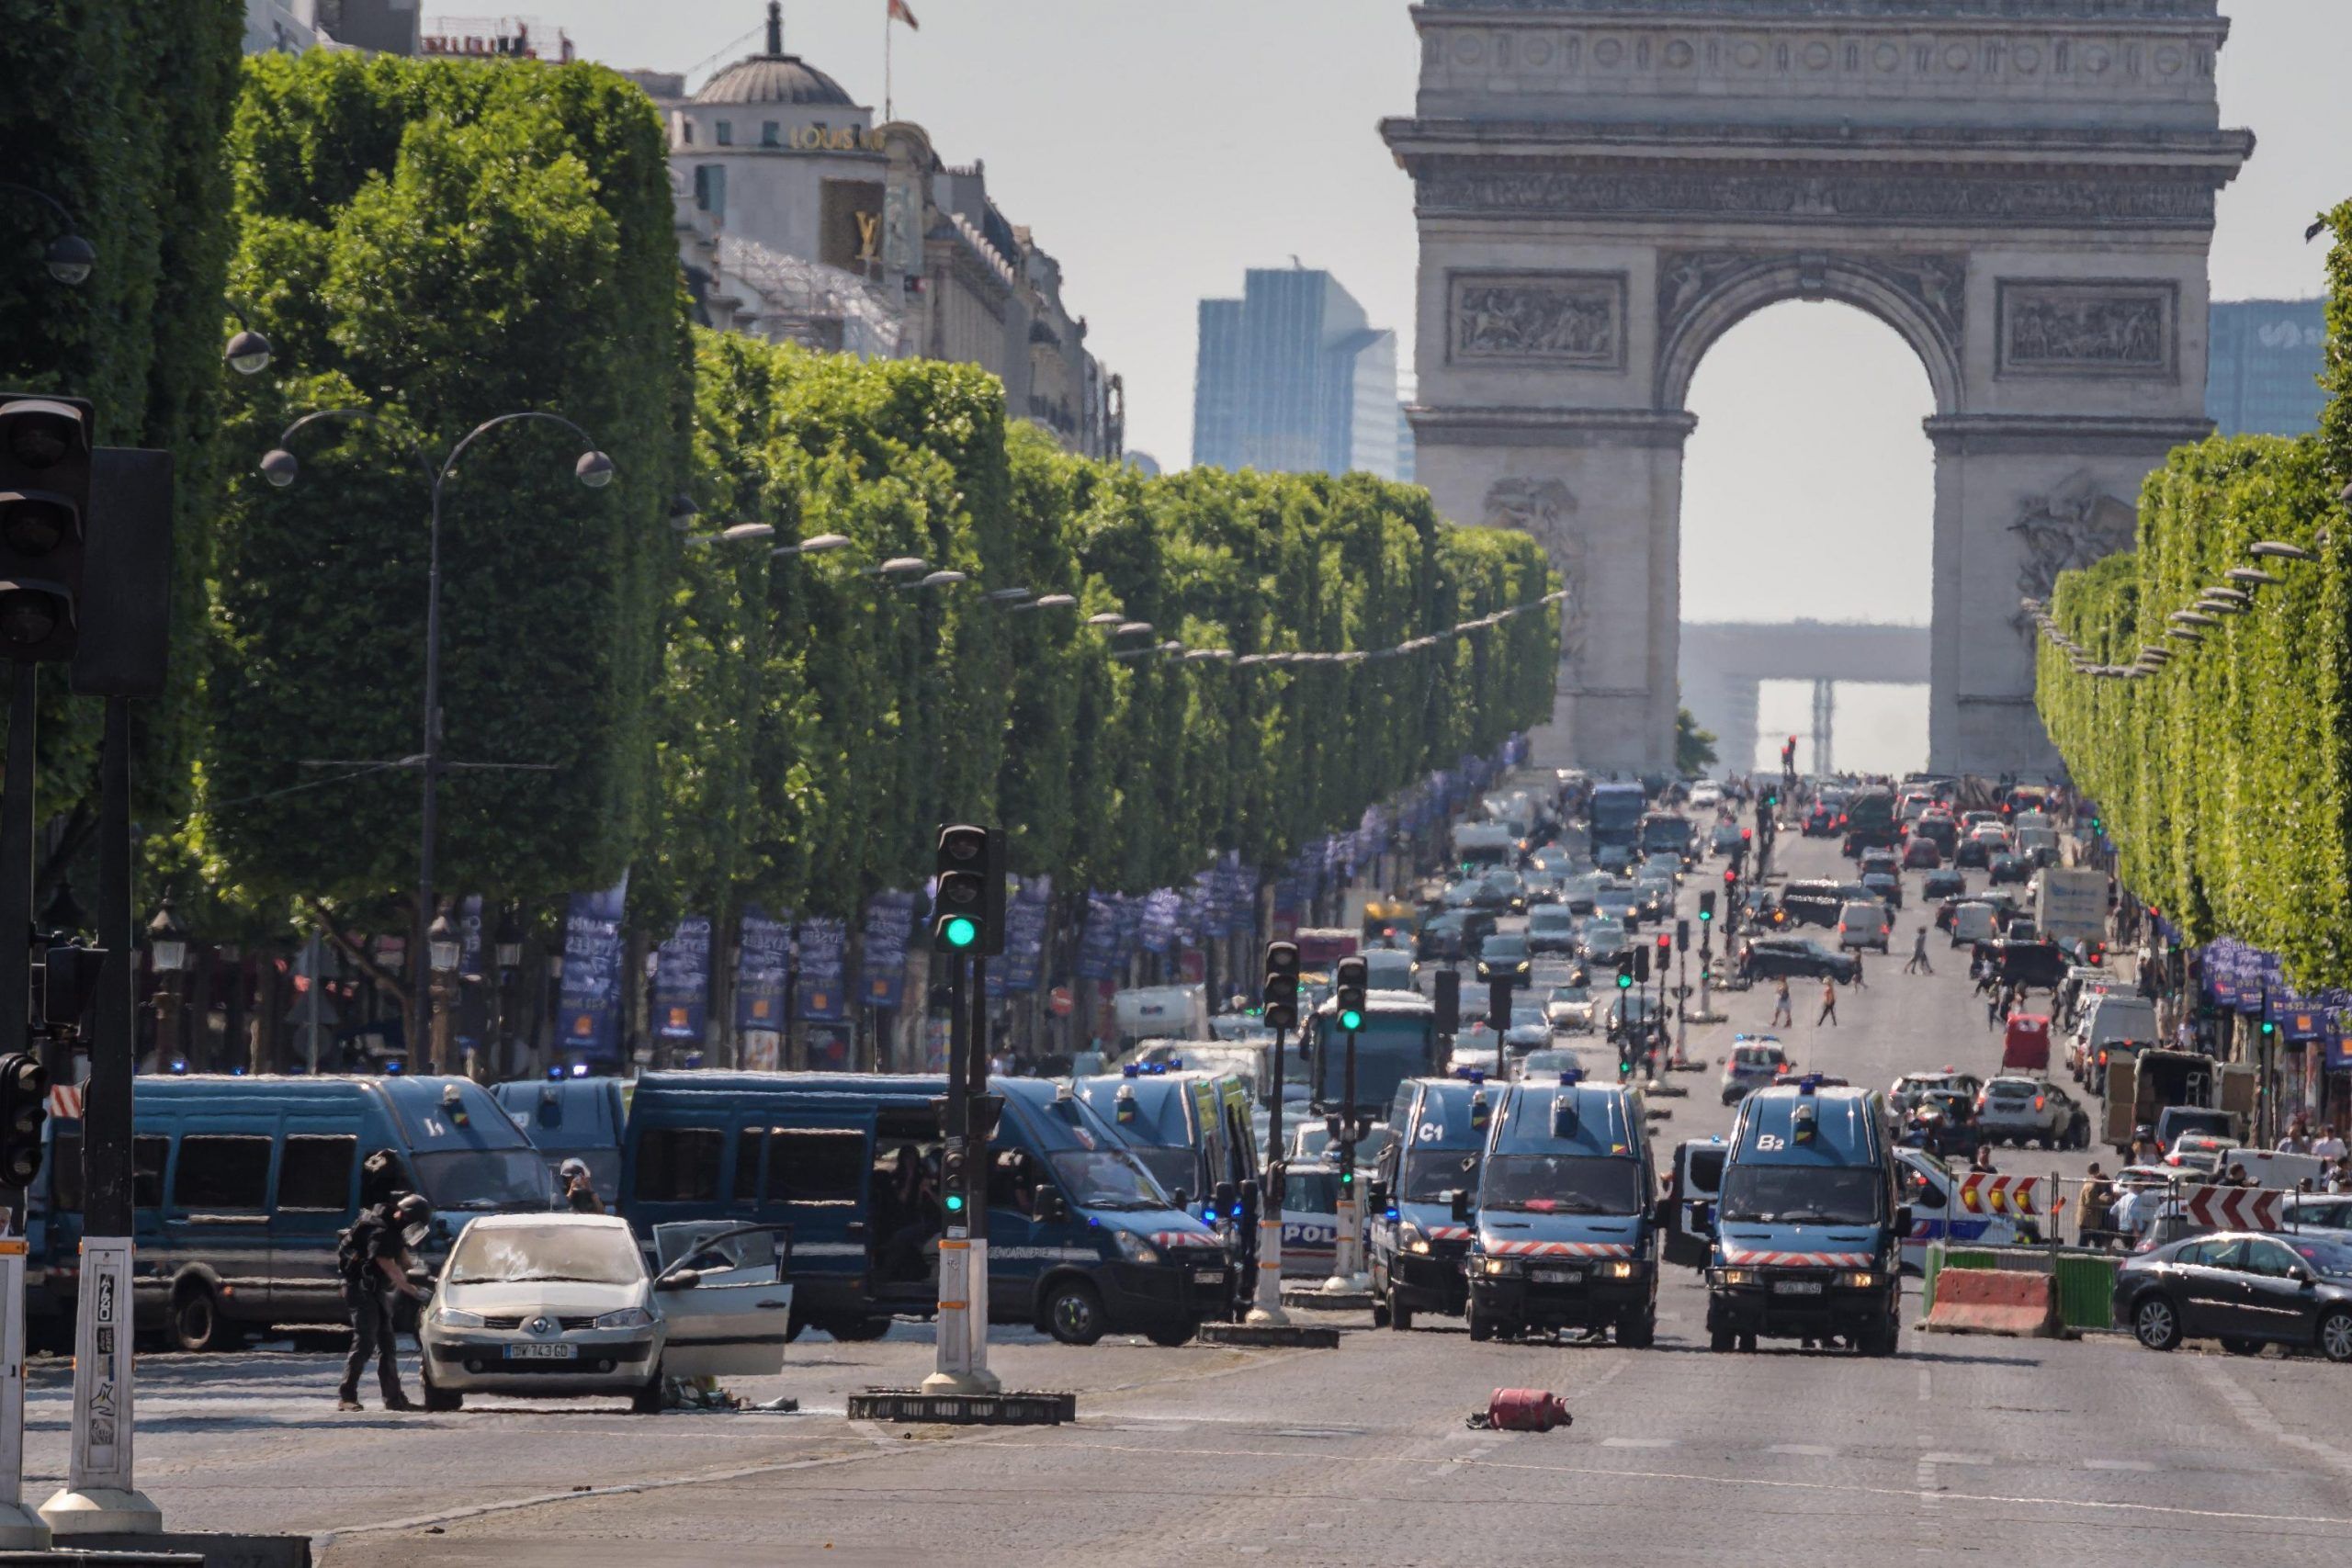 Police operation underway on Champs Elysees Avenue